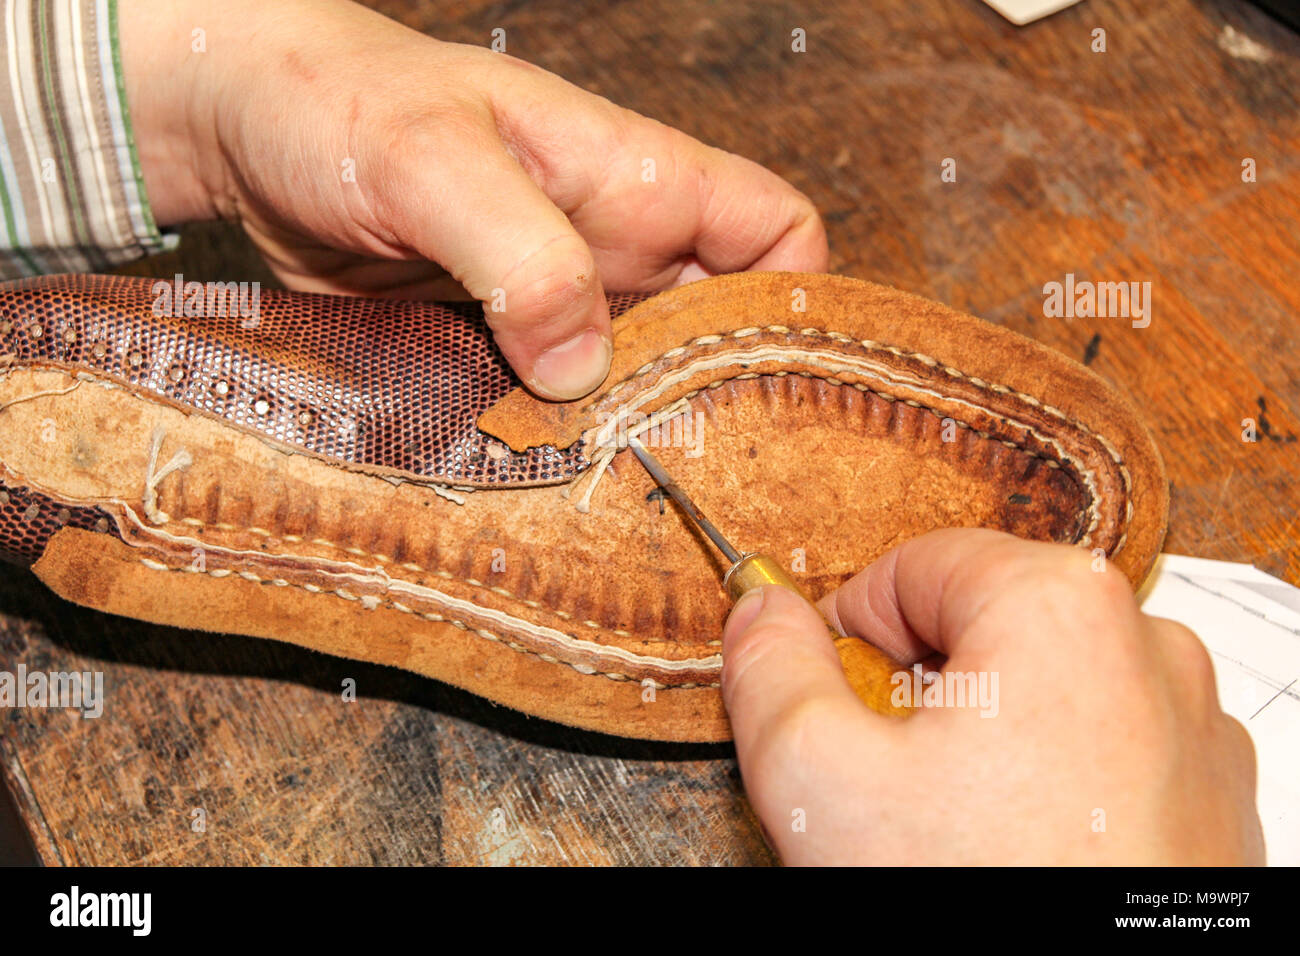 Fixing the sewing thread of a brown leather shoe shows the craftsmanship of a Dutch shoemaker in Oegstgeest the Netherlands. Stock Photo